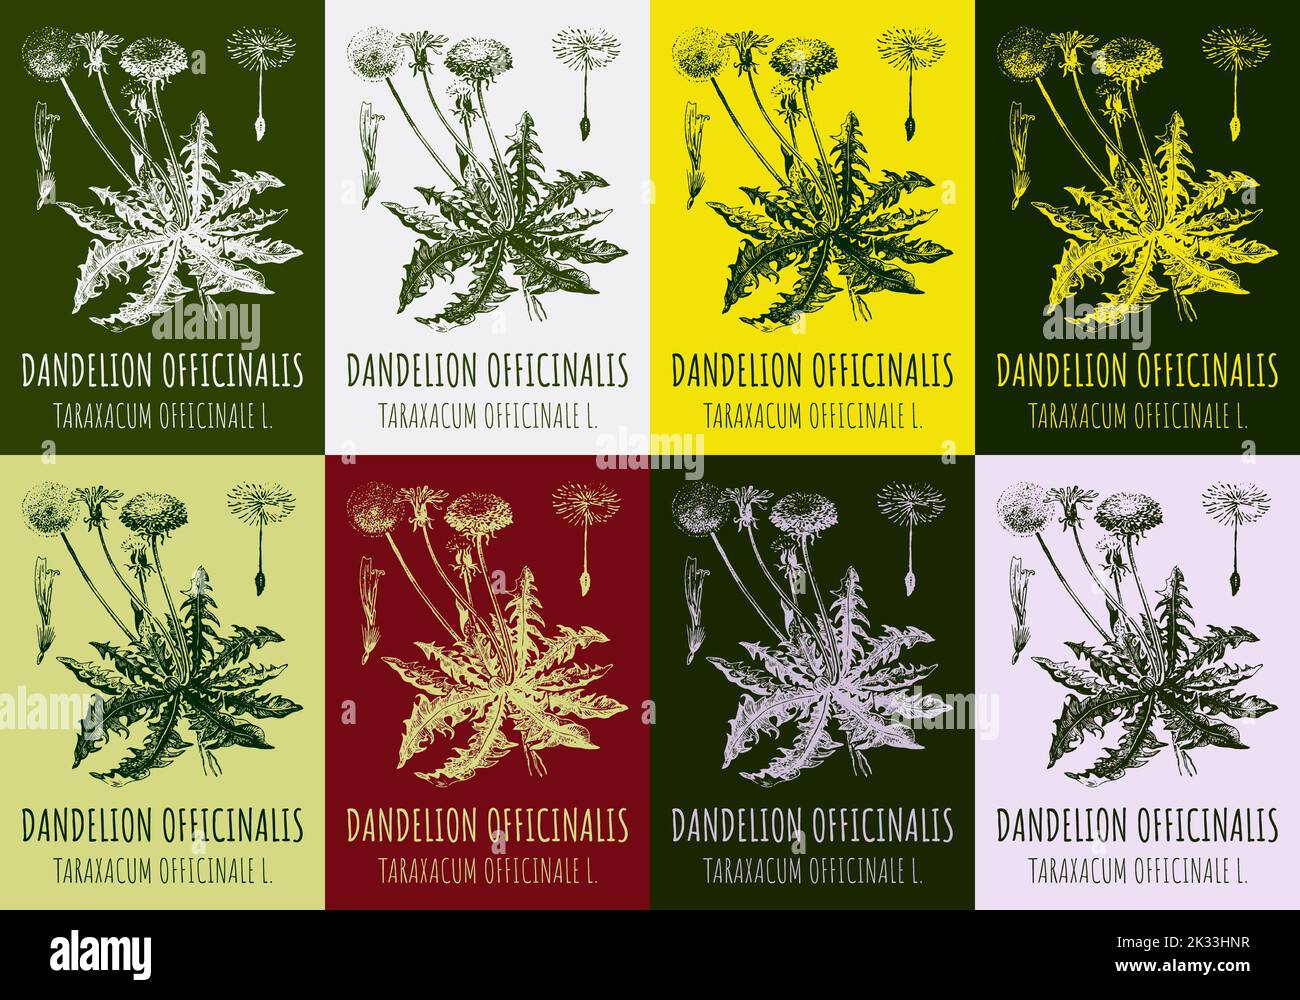 Set of vector drawings of dandelion in different colors. Hand drawn illustration. Latin name Taraxacum officinale. Stock Photo